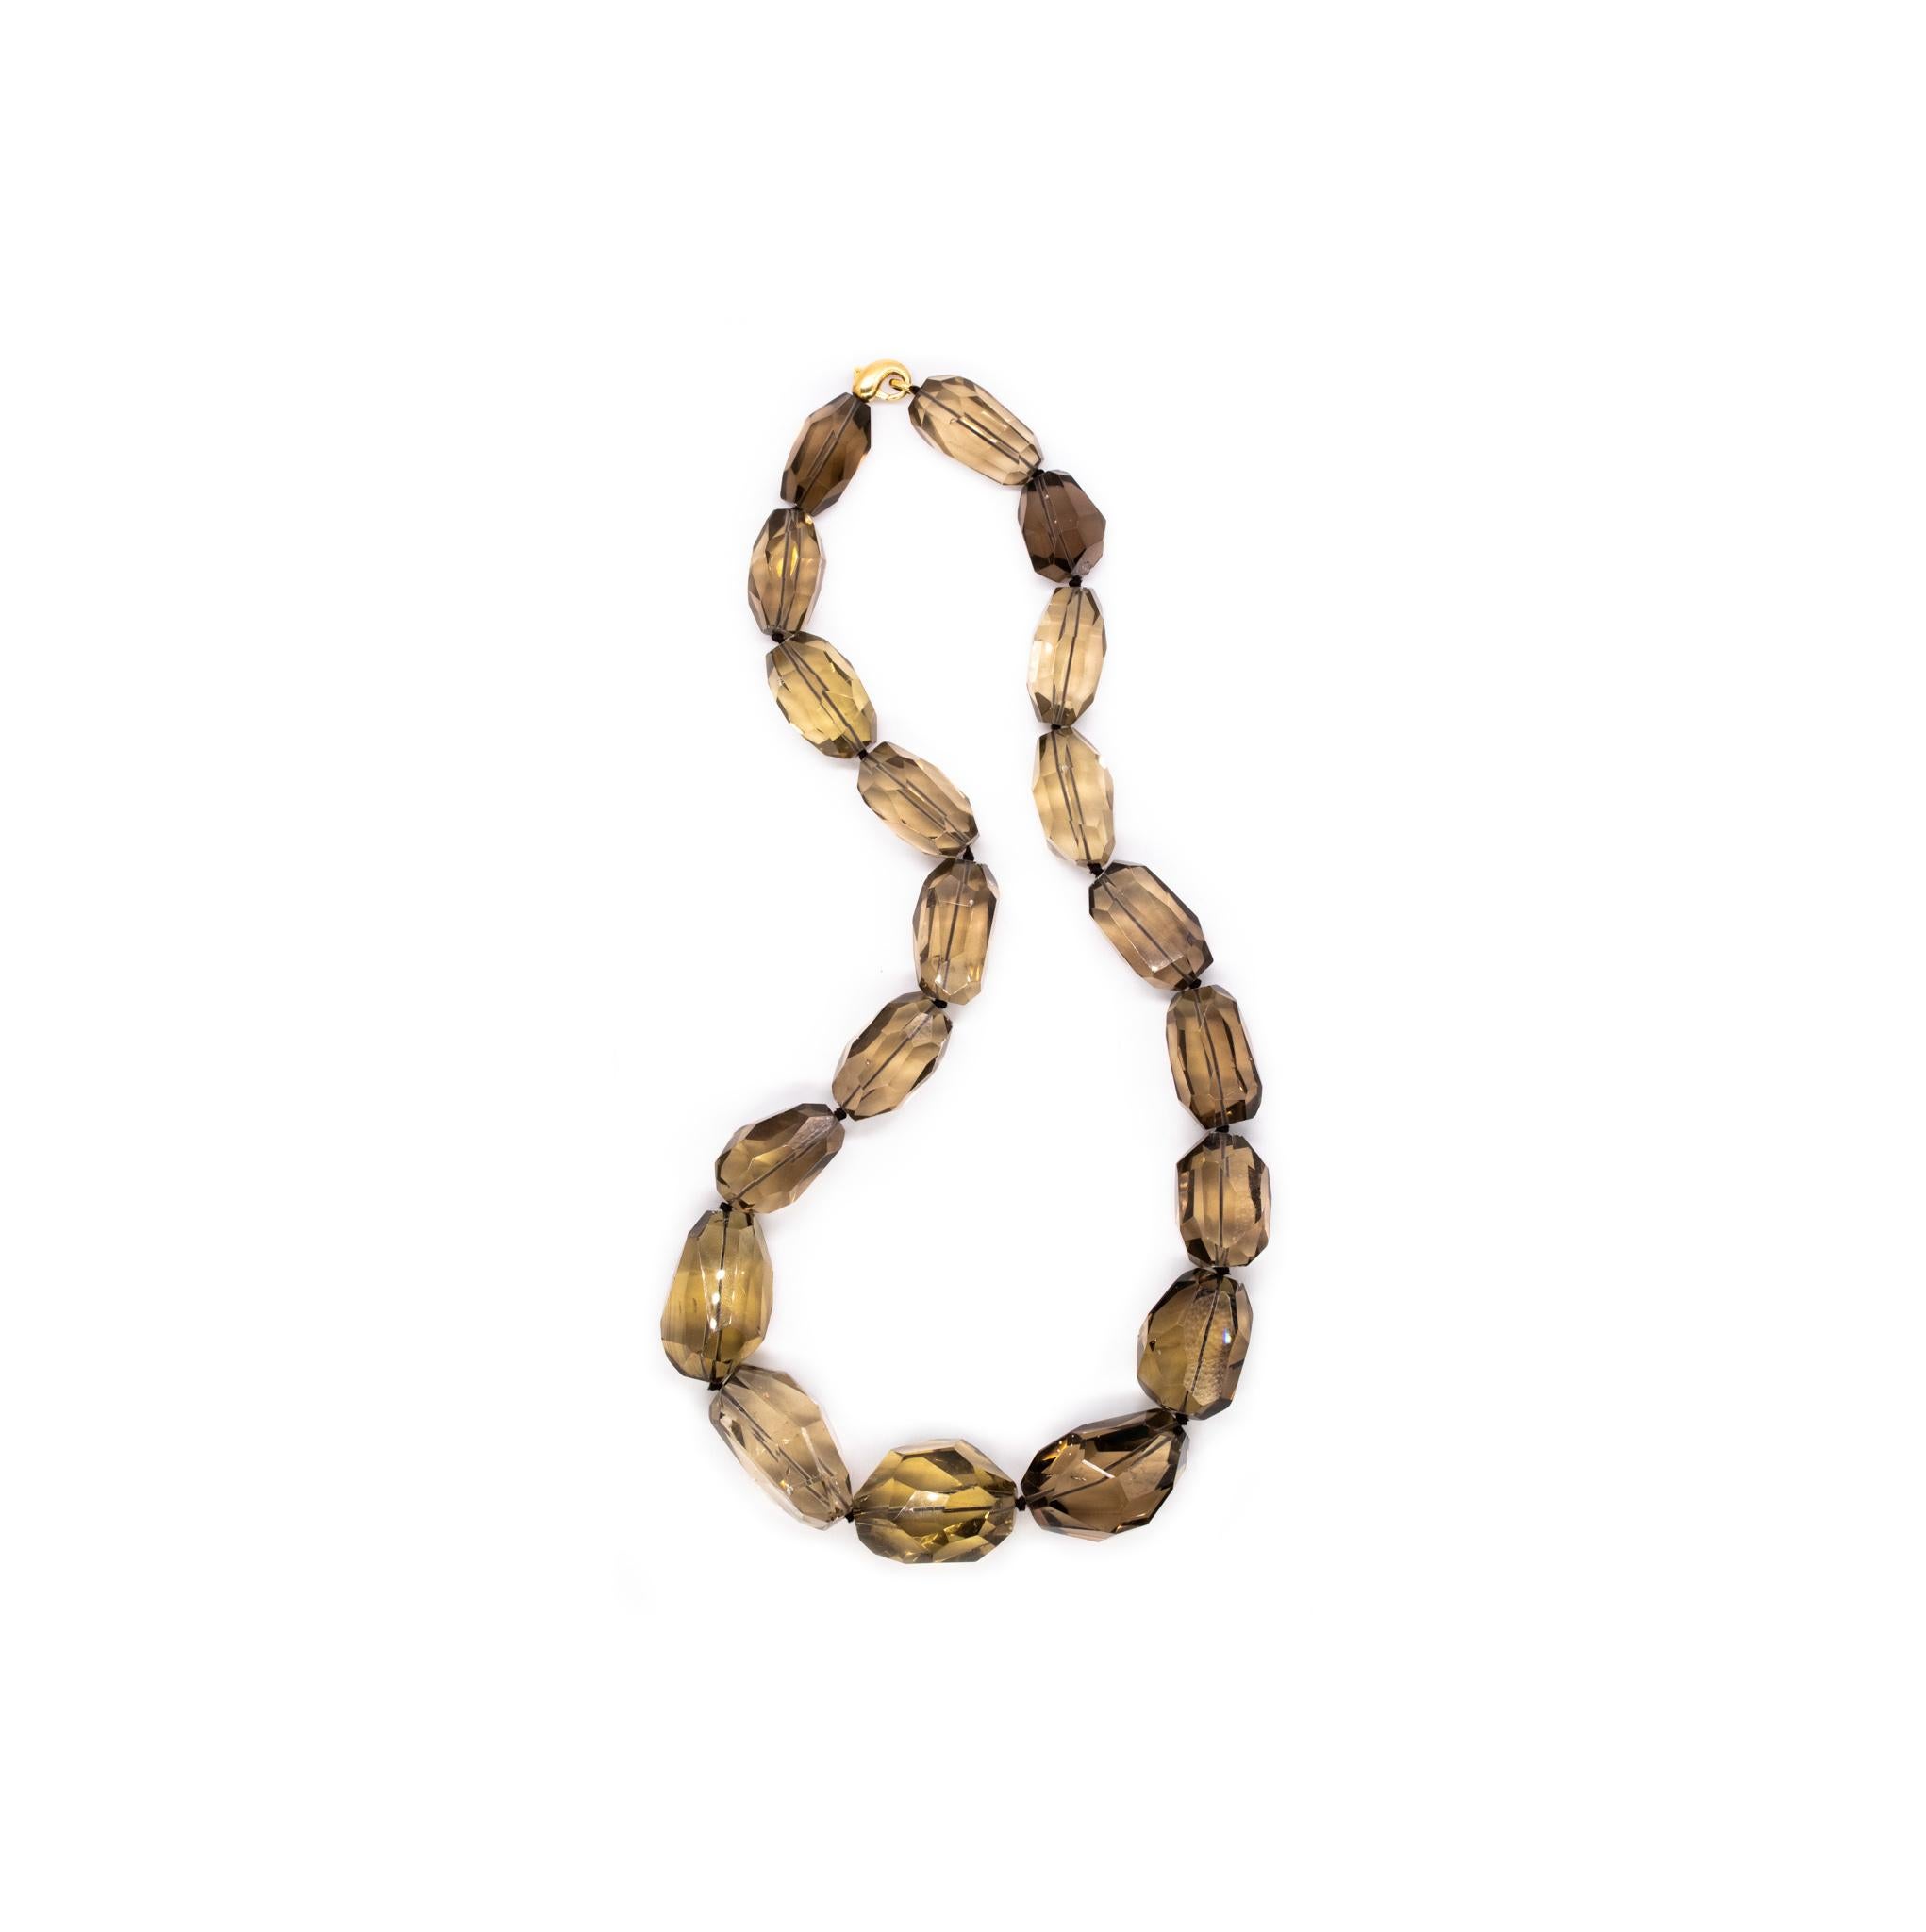 An statement necklace designed by H. Stern.

Very modern and massive piece designed by the Brazilian jewelry house of H. Stern. Is composed by 19  oversized faceted beads of natural Brazilian Greenish-Smokey quartz and suited with a 18 karats yellow